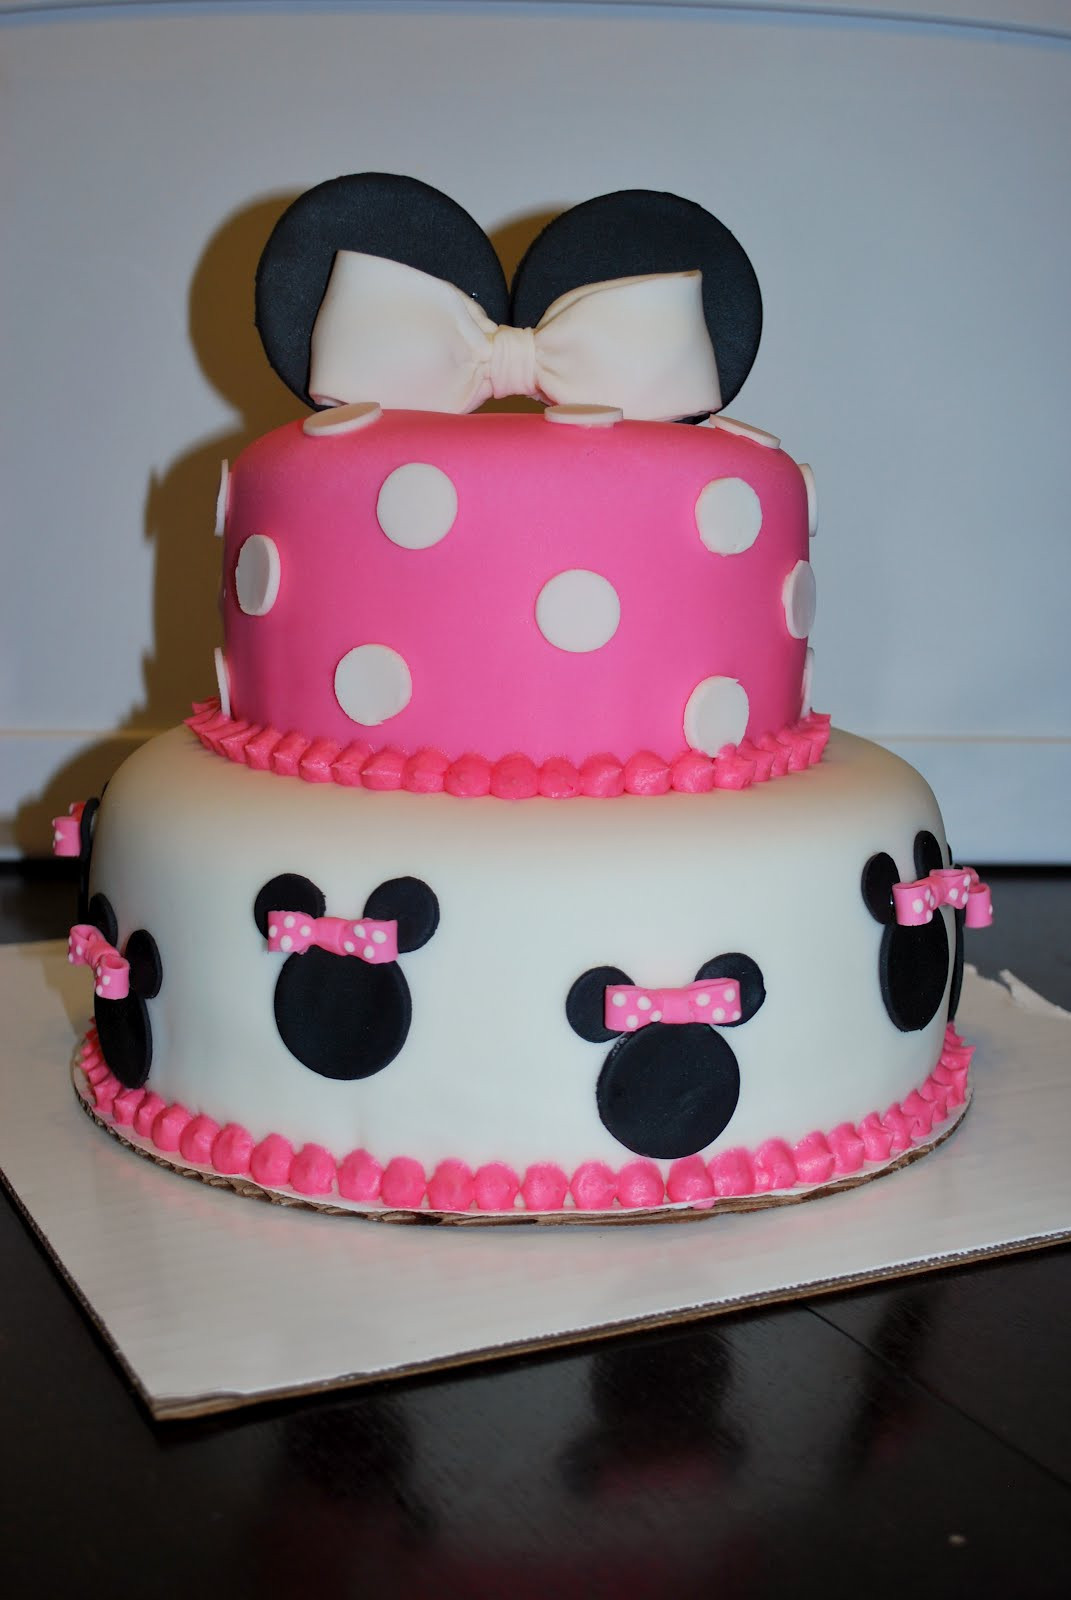 2 Yr Old Girl Birthday Party Ideas
 Abby Cakes Birthday Cakes for two very special little 2